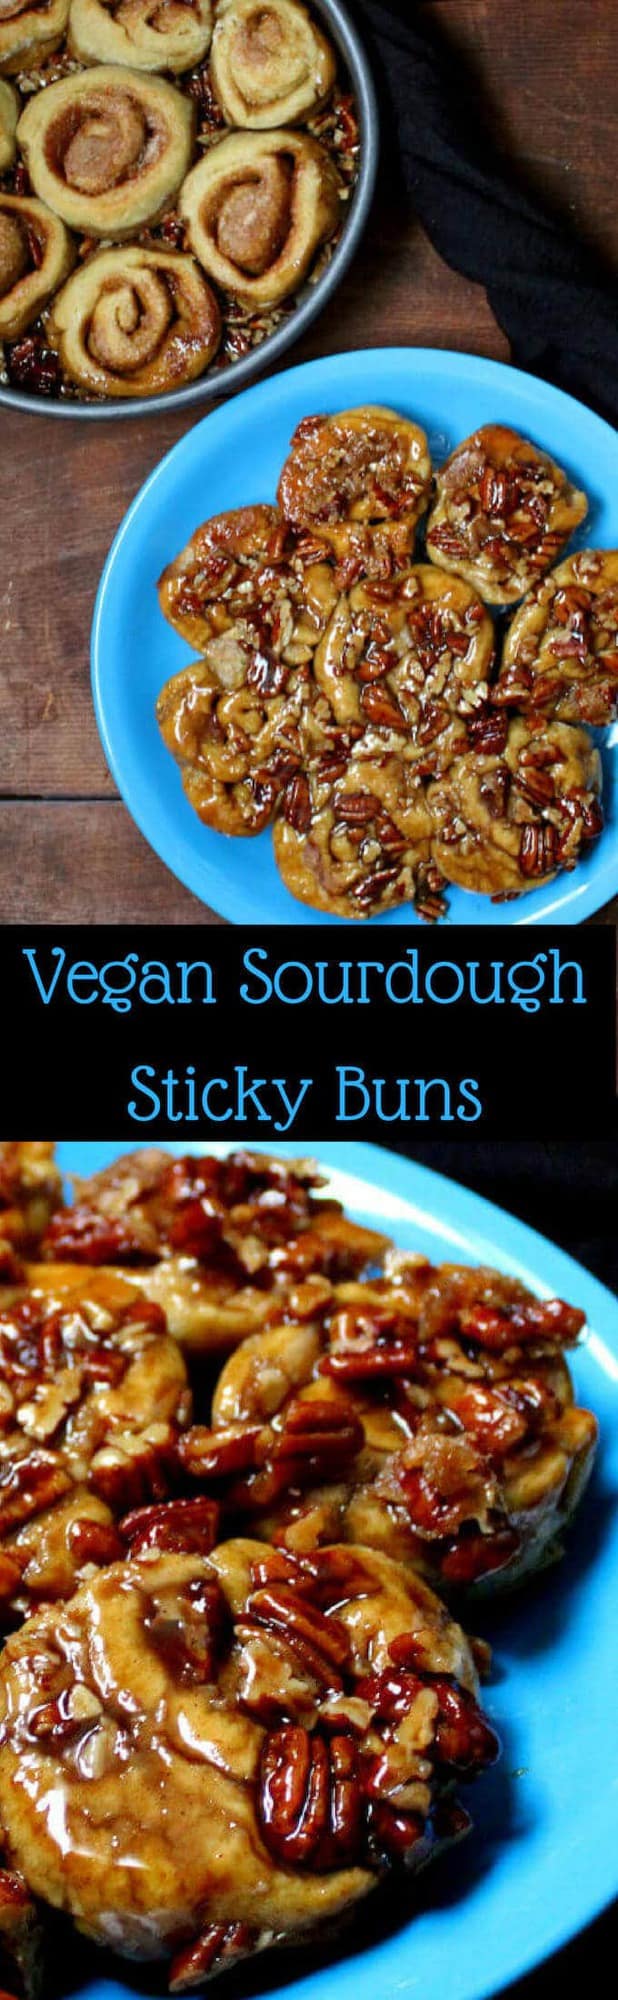 Images of sticky buns with text inlay that says "vegan sourdough sticky buns"